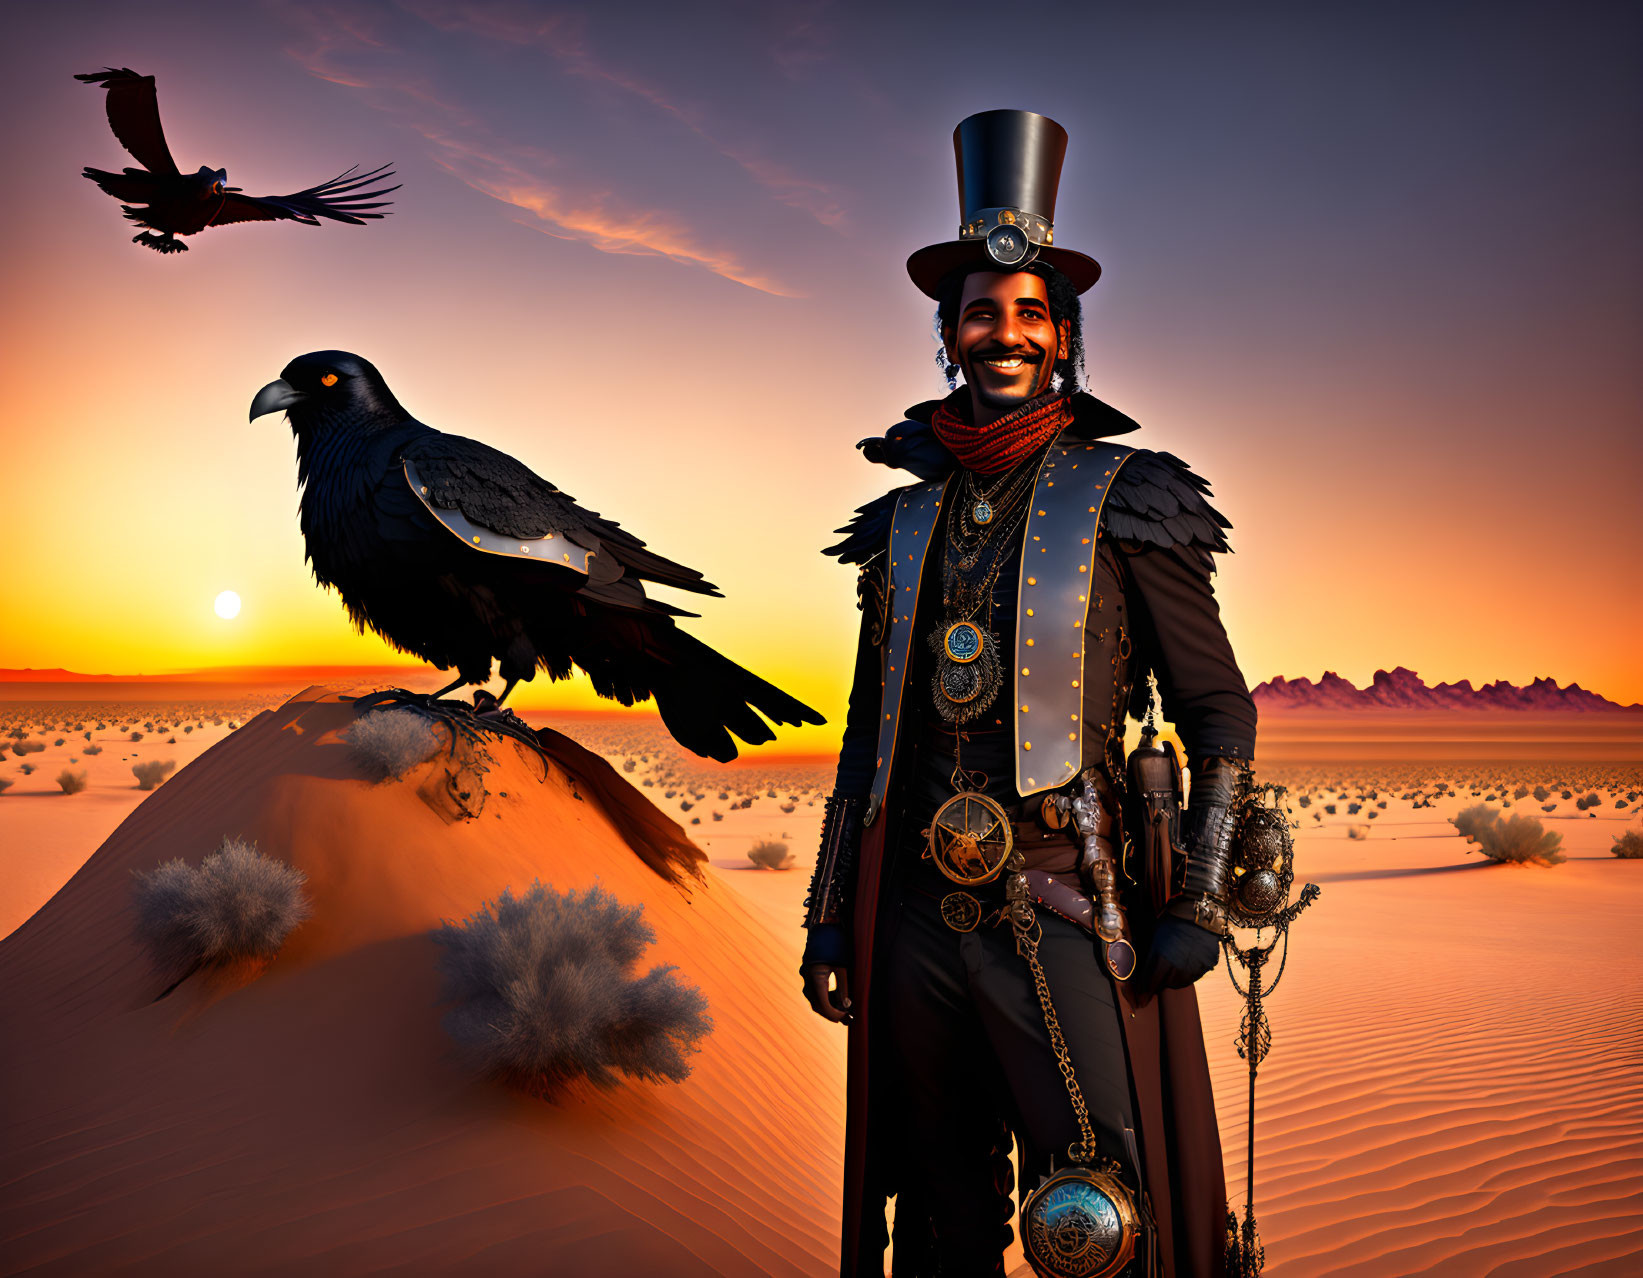 Man in top hat with raven in desert at sunset, second bird flying